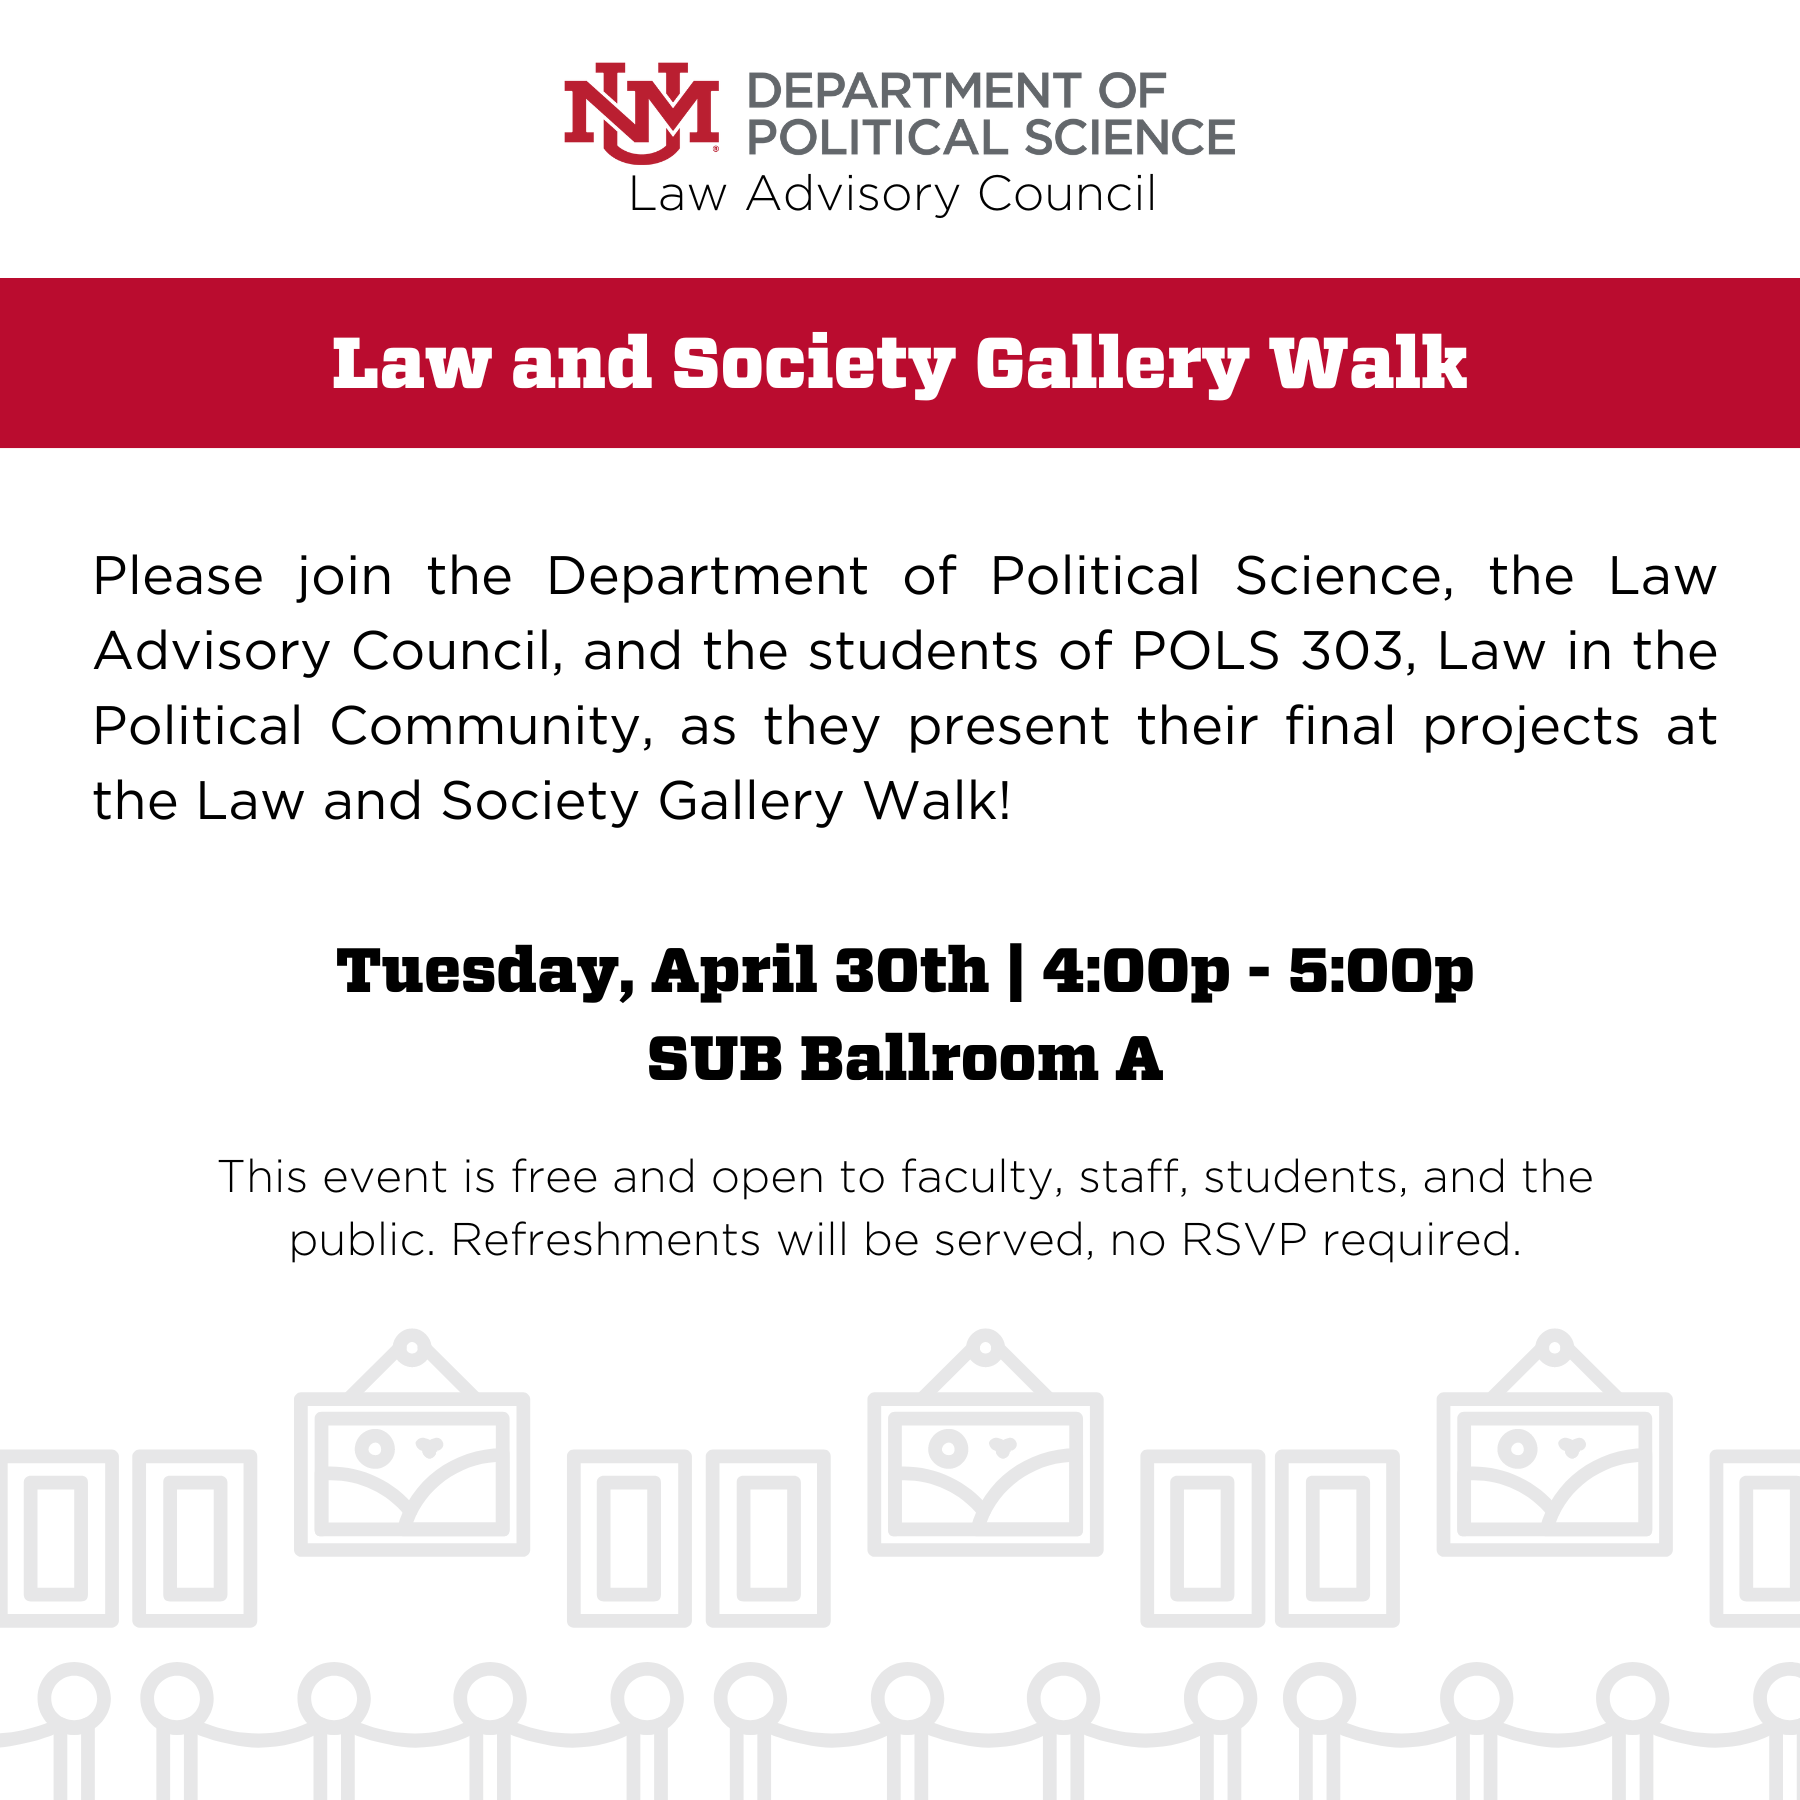 come-join-the-students-of-law-in-the-political-community-and-an-audience-of-local-legal-professionals-for-a-law-and-society-gallery-walk-on-april-30-at-4pm-for-this-public-event-unm-students-wil.png